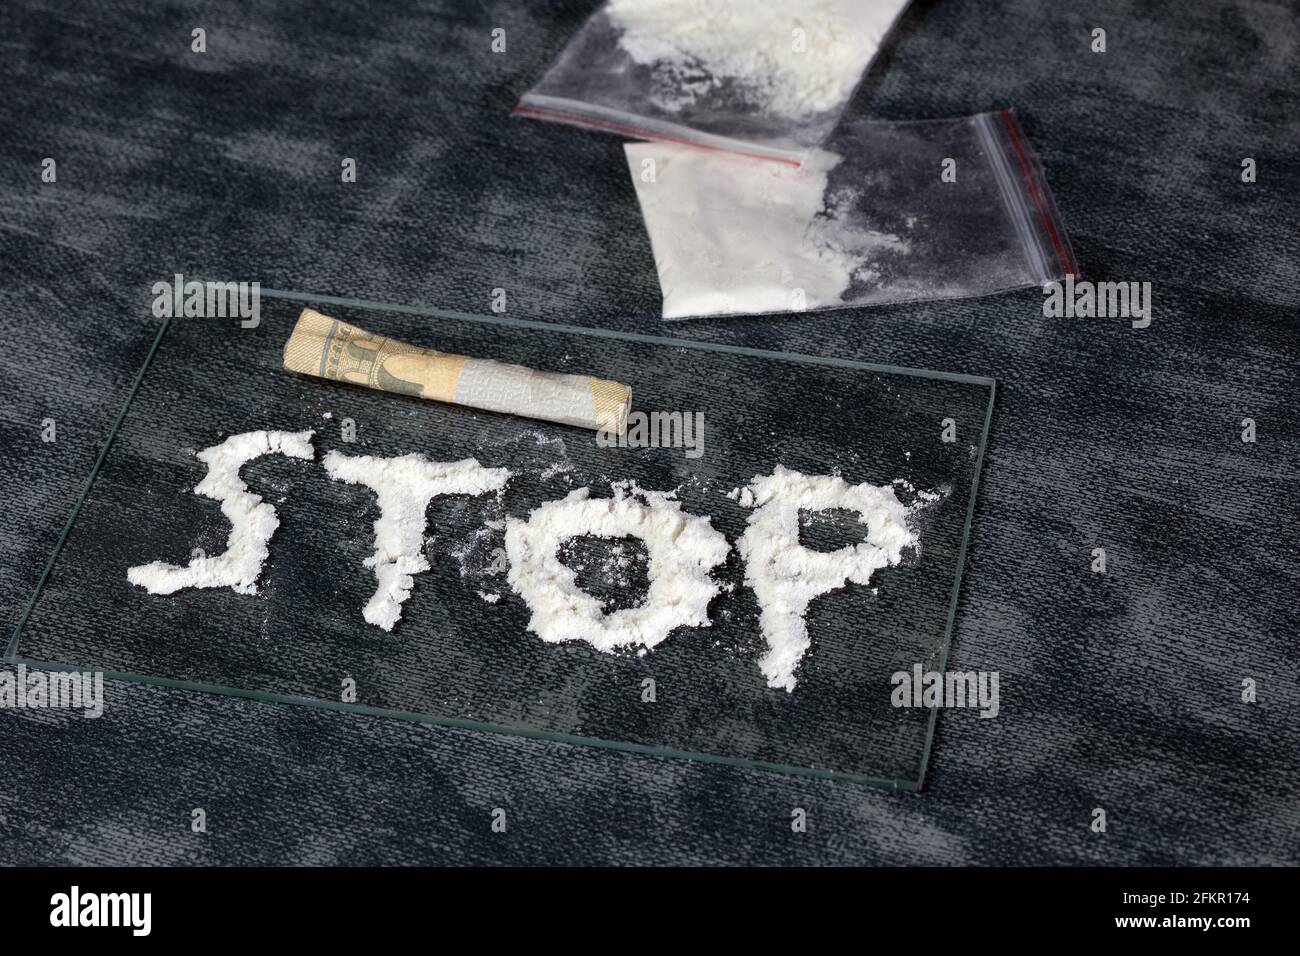 Line of white powder drugs, Cocaine, speed and plastic bags with other drugs, STOP written in the powder, Addiction,drug,junky,dealer concept Stock Photo